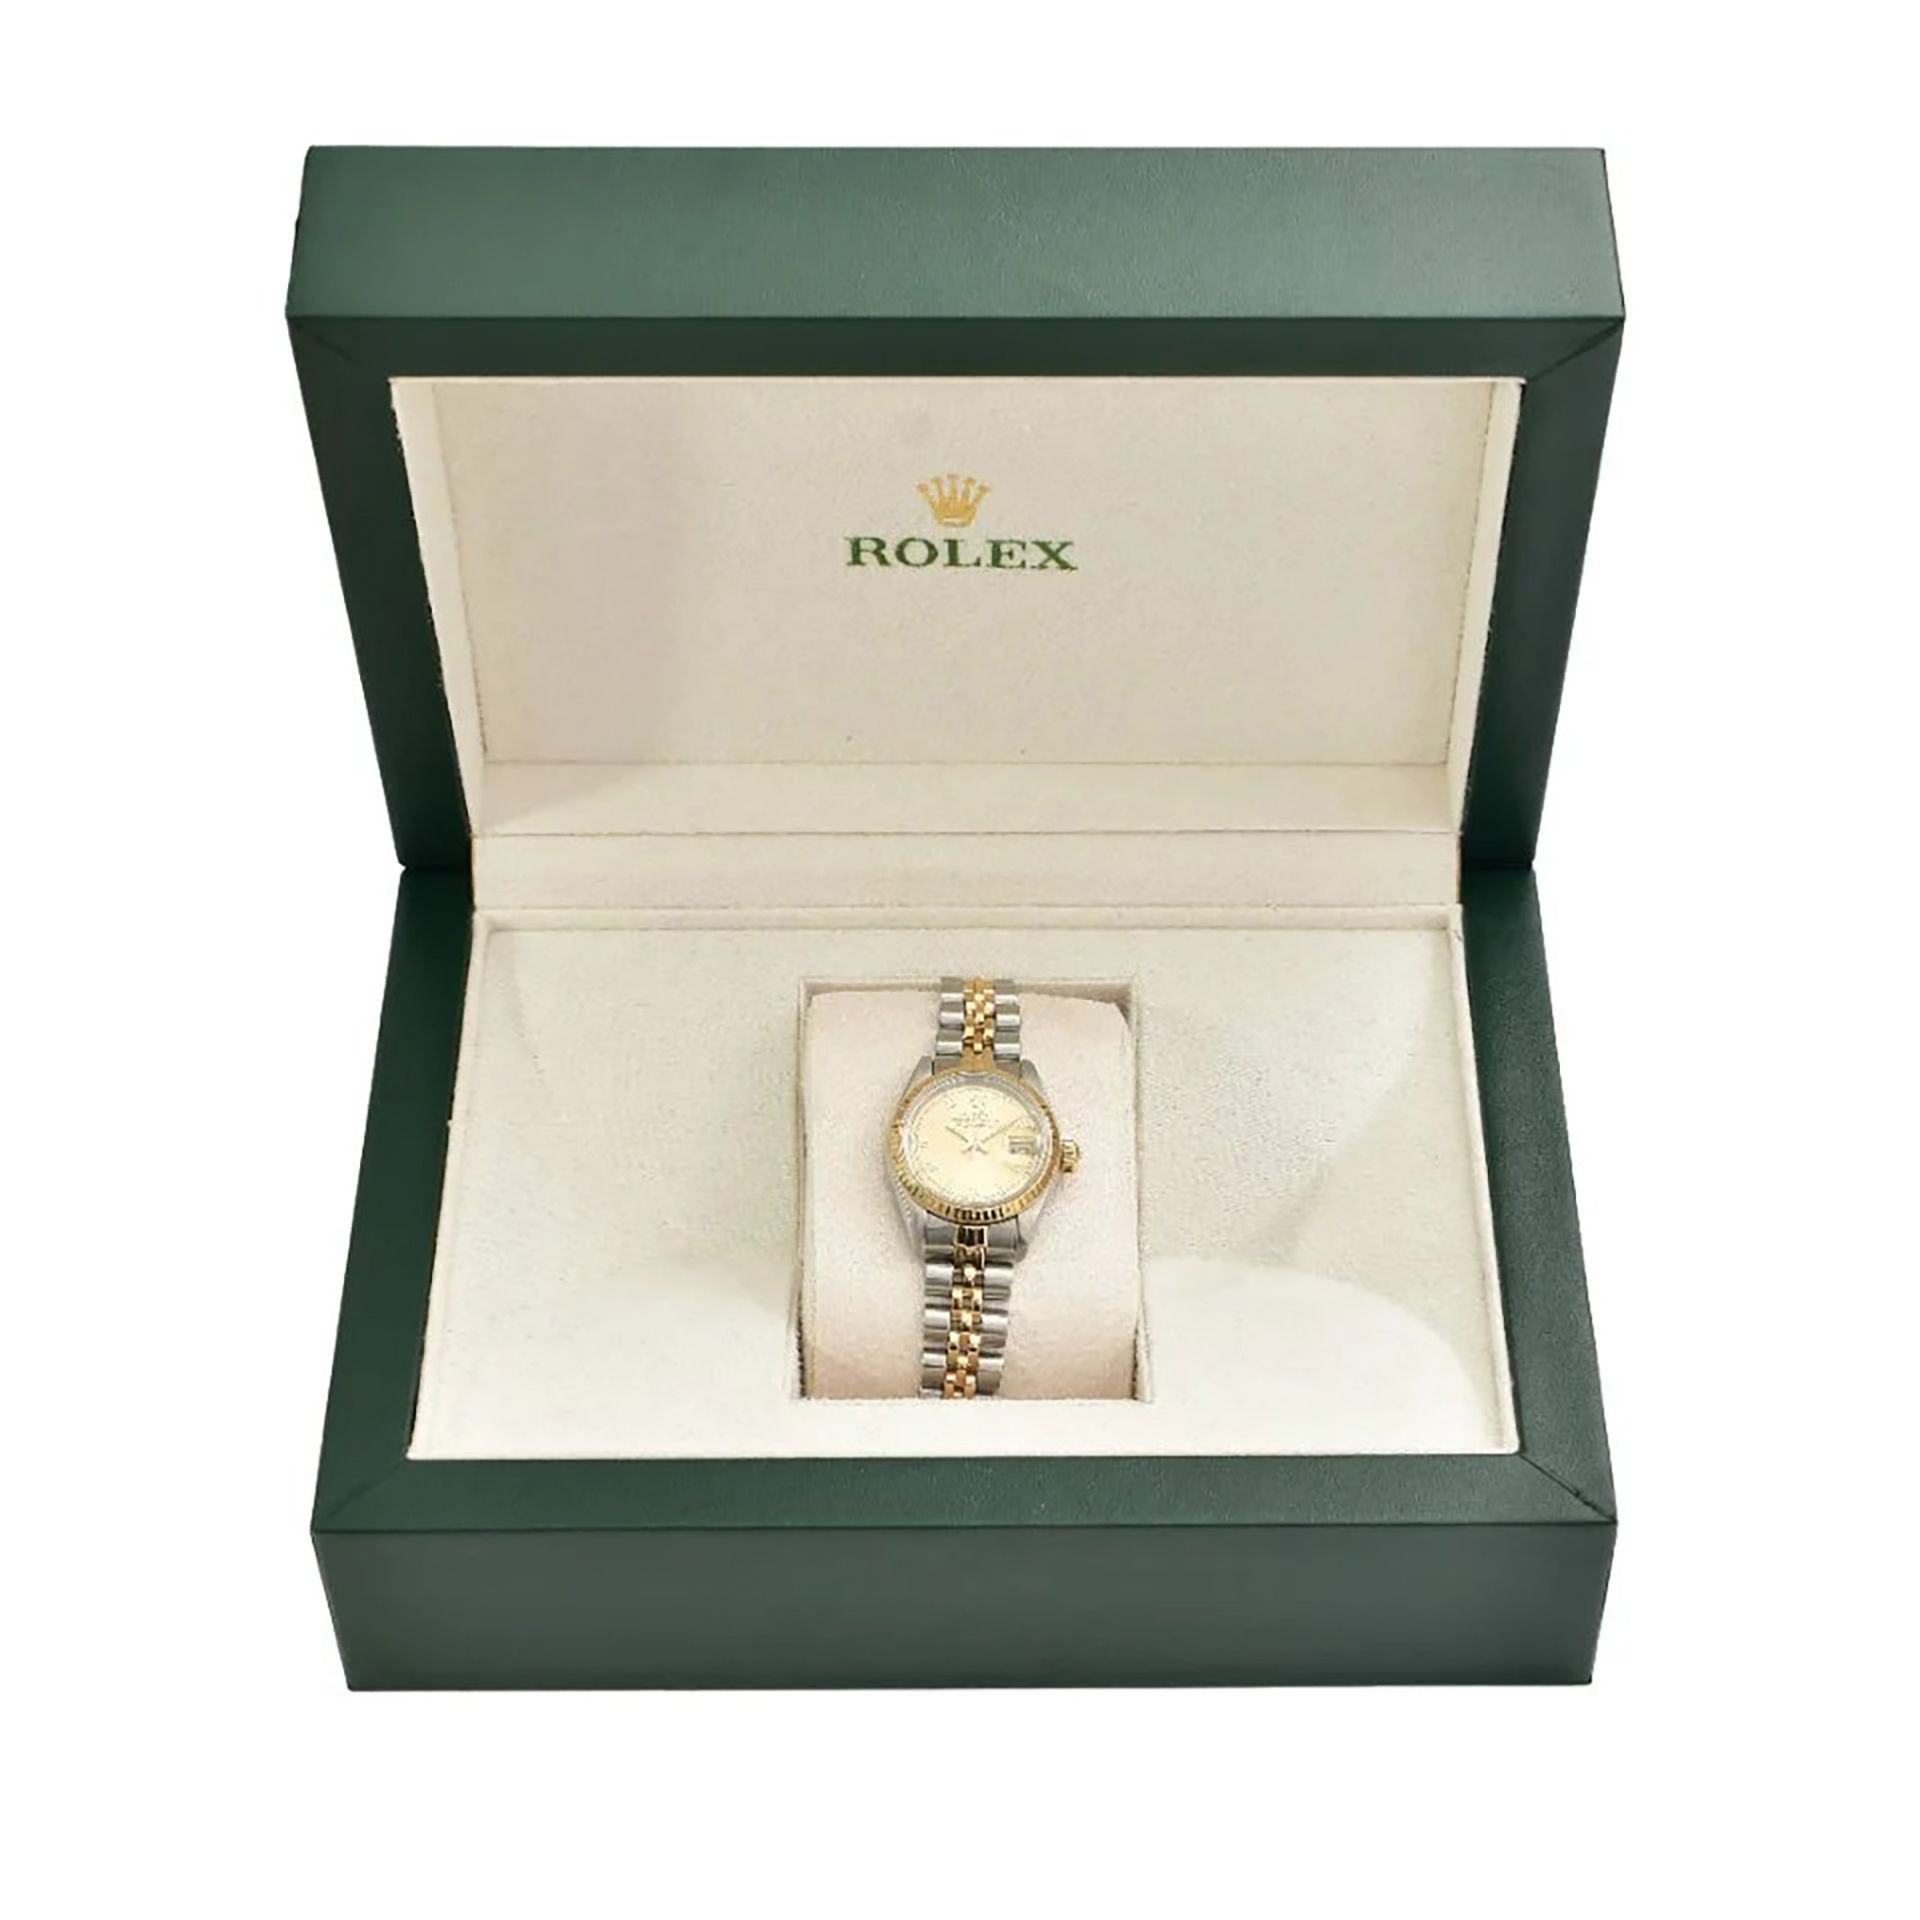 Vintage Rolex Lady Date wristwatch in steel and gold - Image 3 of 6